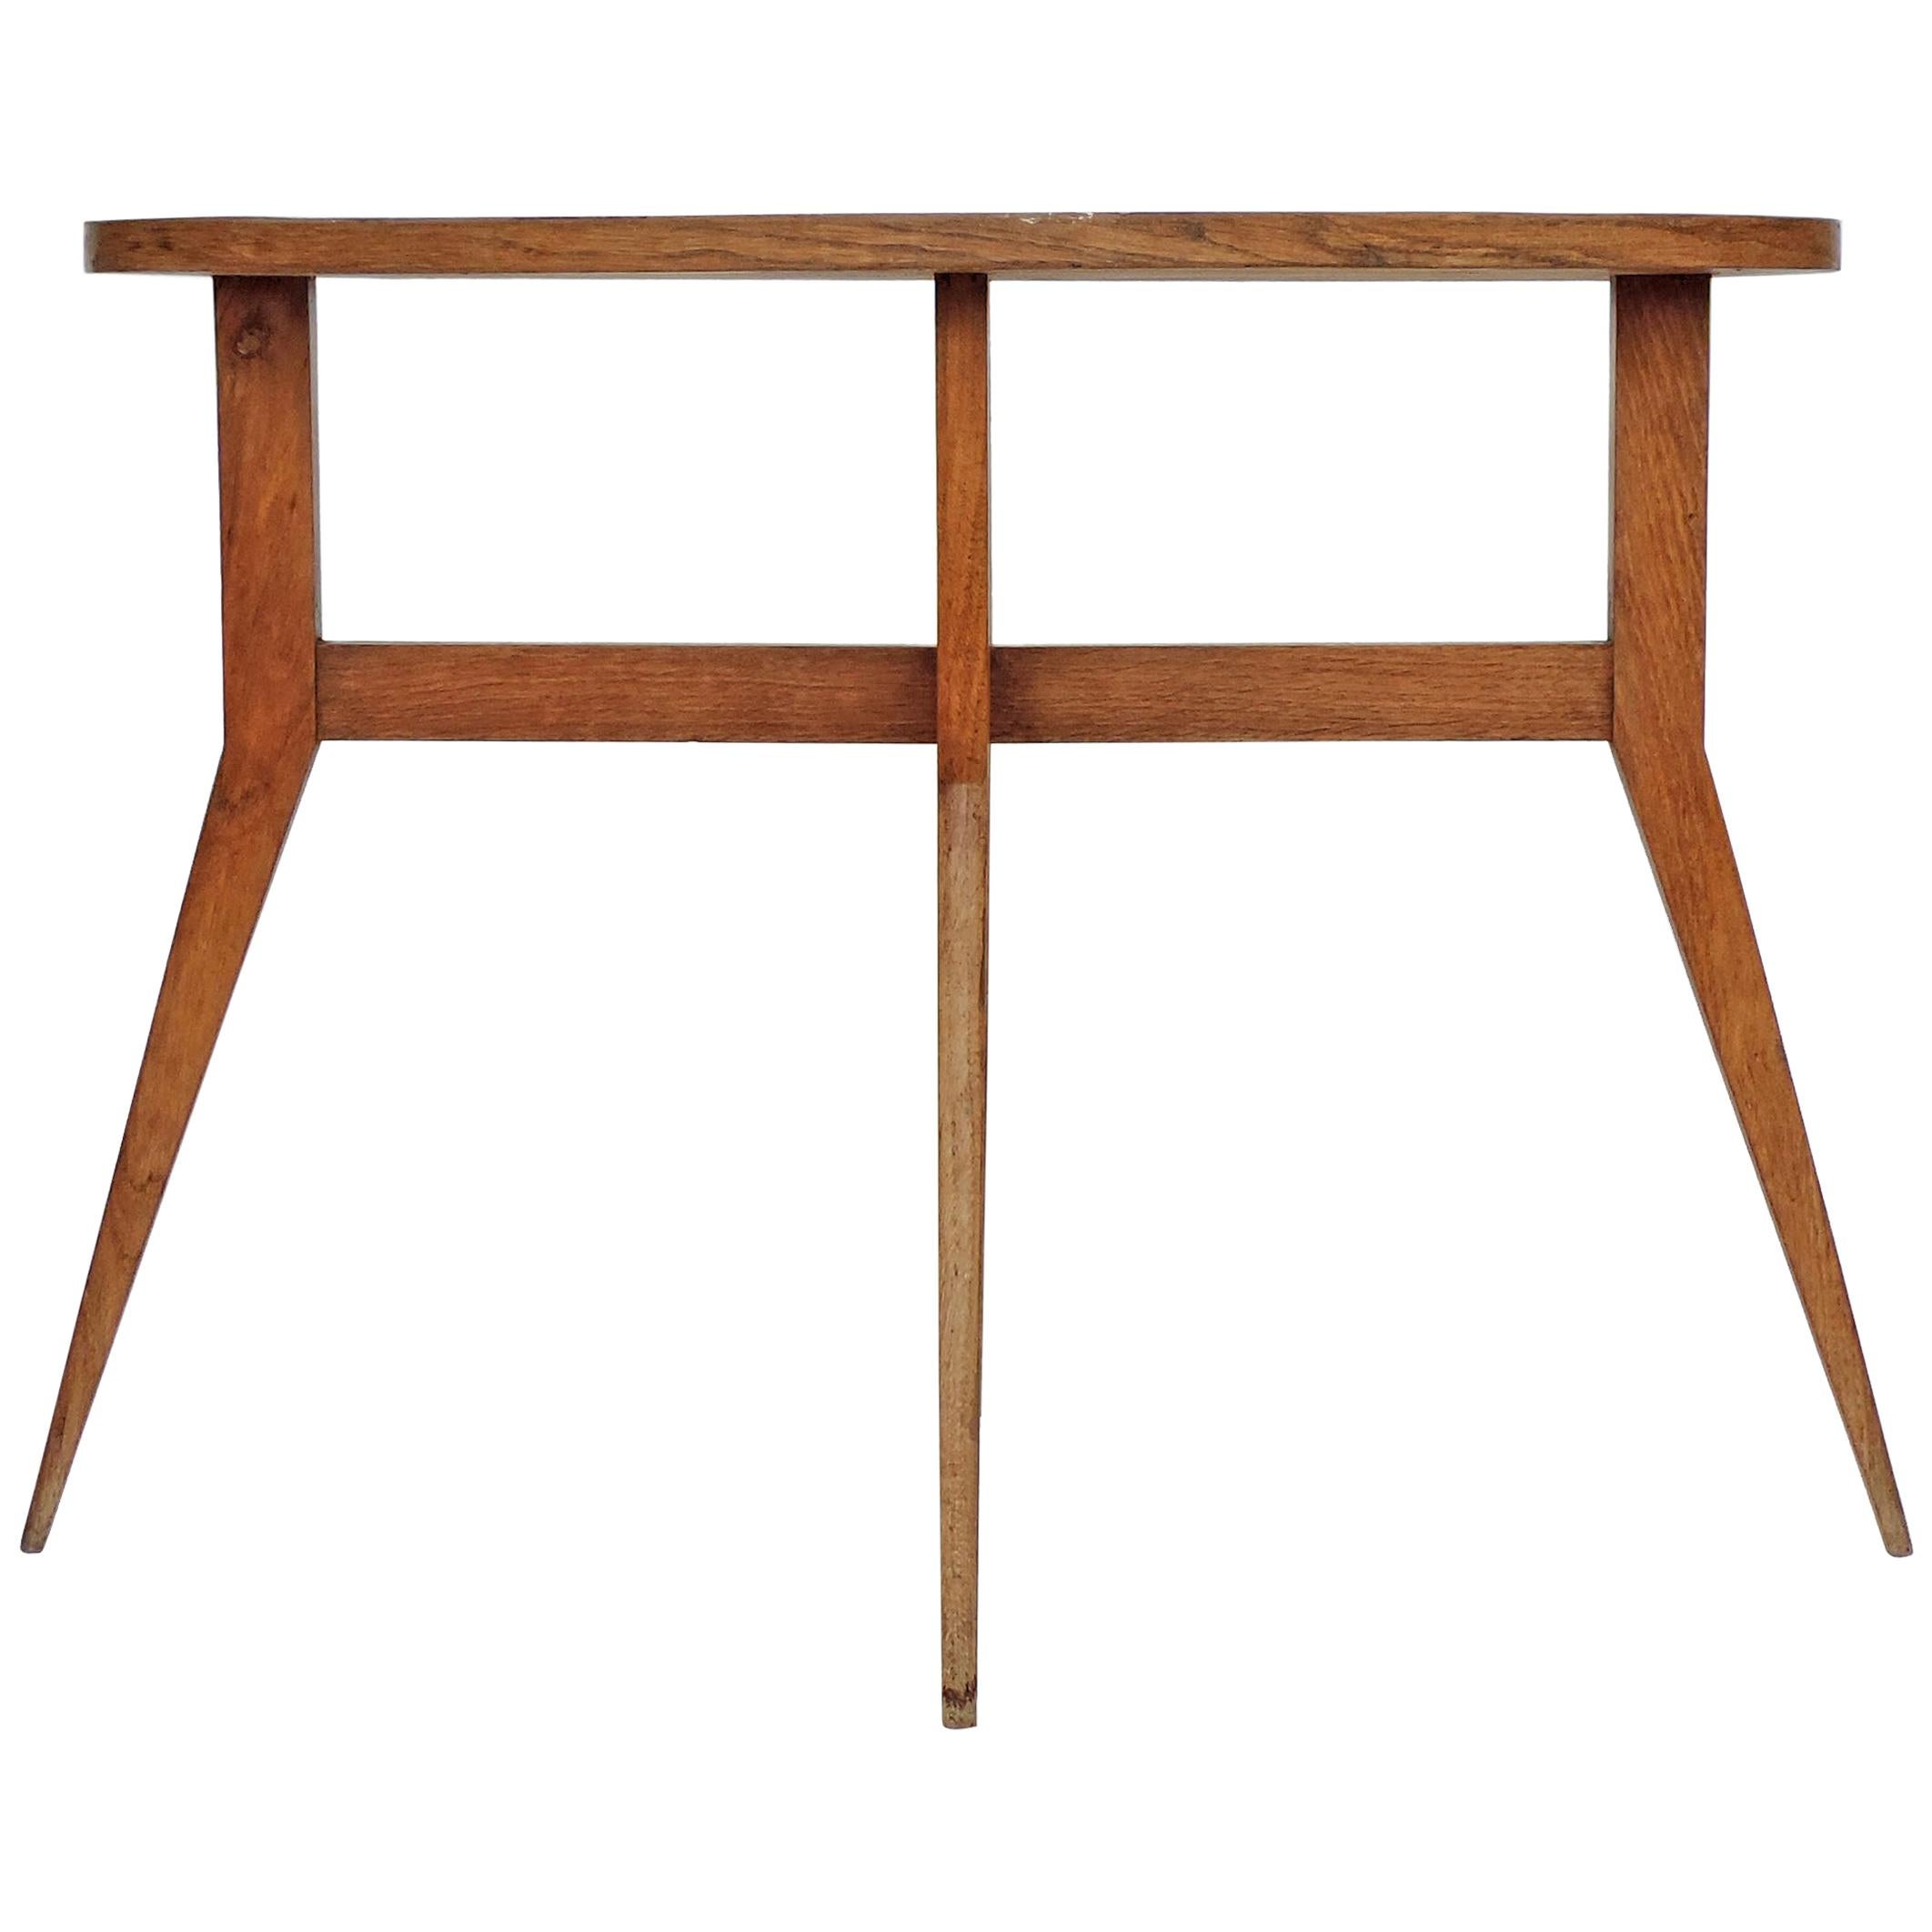 Italian Midcentury Side Table Attributed to Gio Ponti